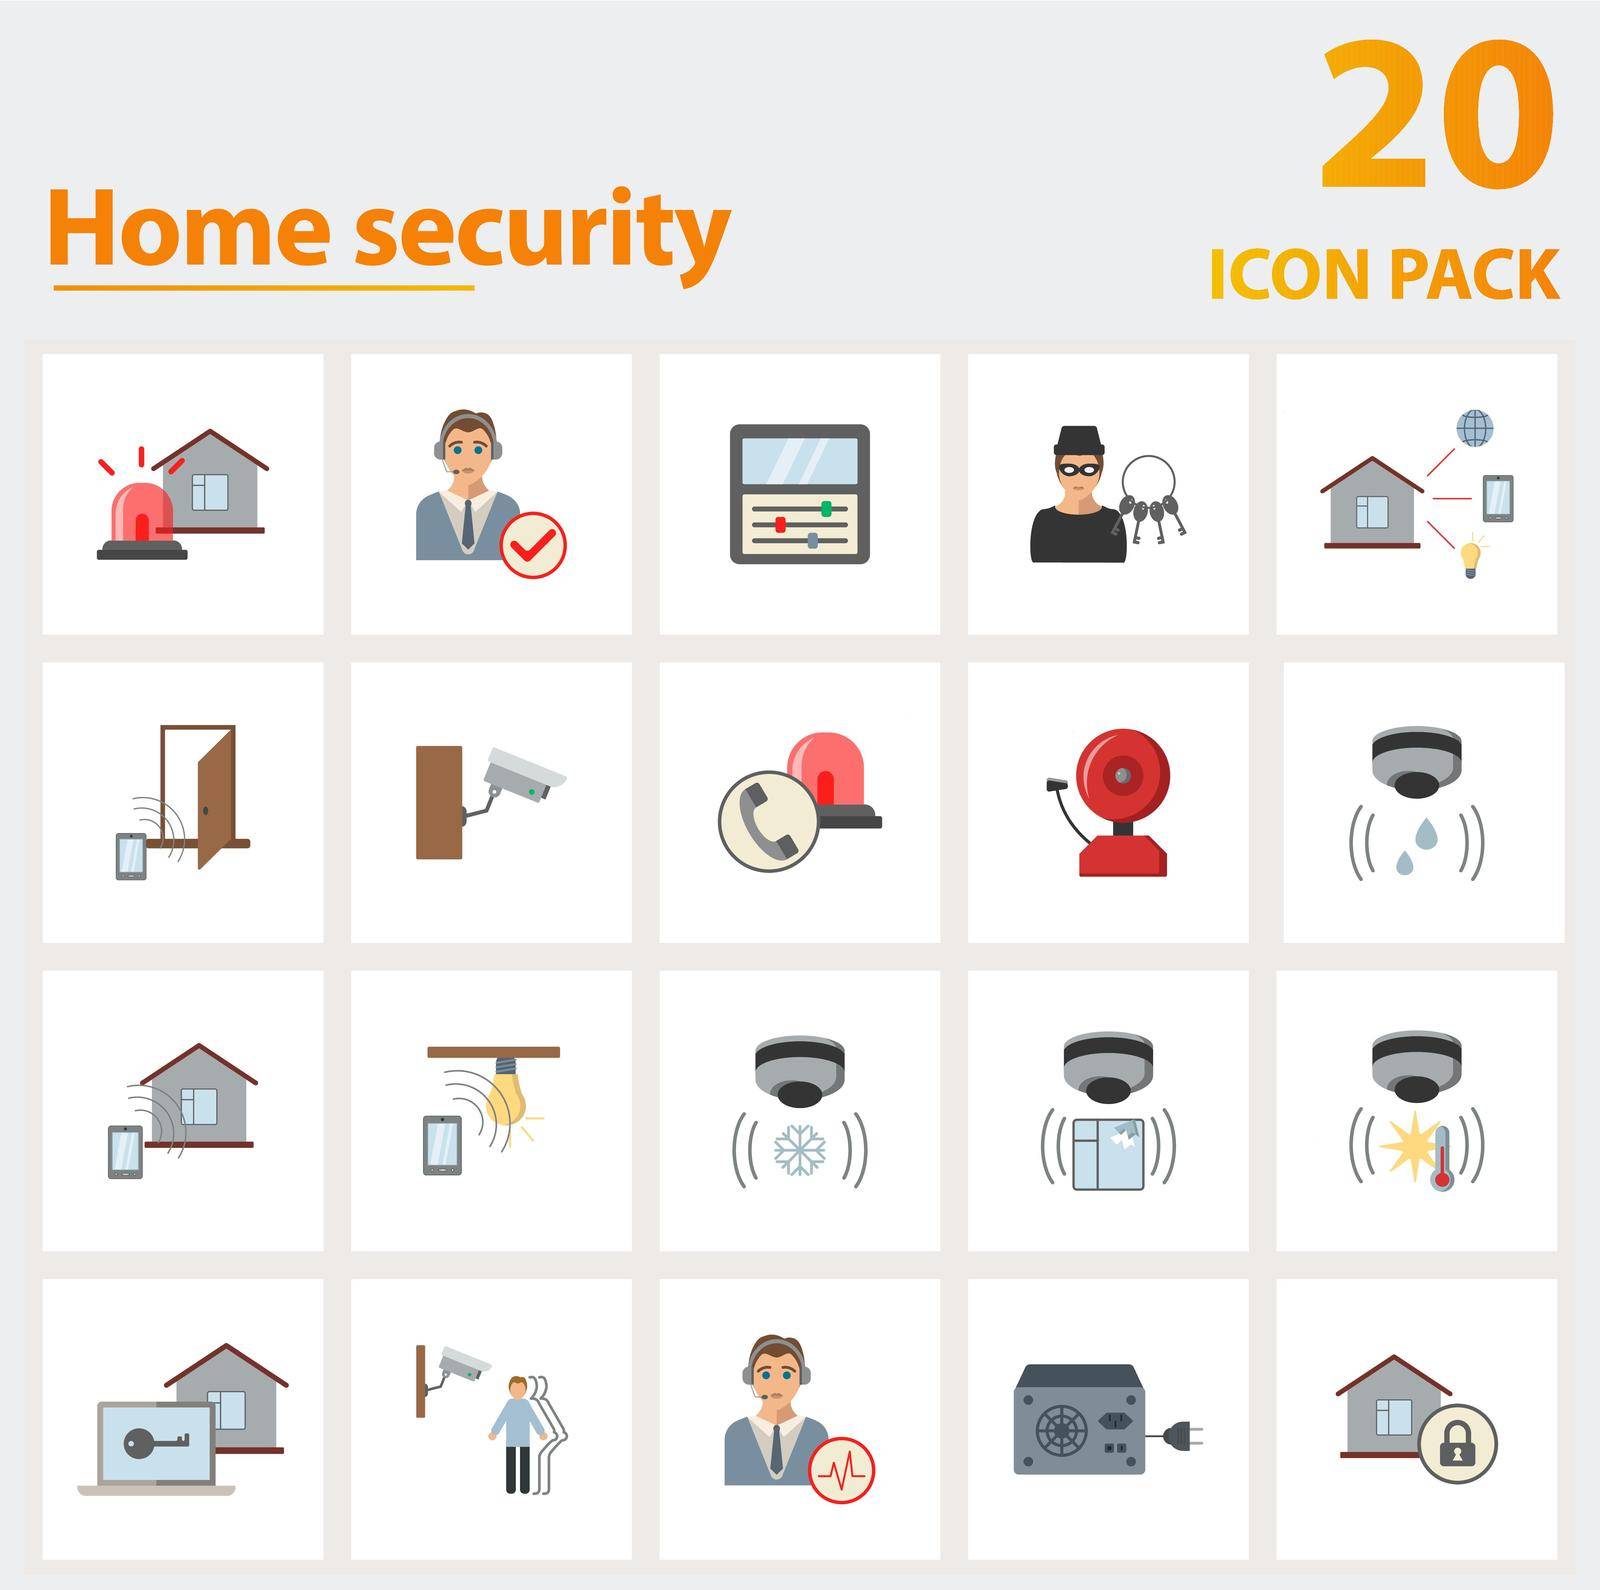 Home Security icon set. Collection of simple elements such as the alarm system, call verification, control panel, emergency call, fire alarm, home automation, burglar and other icons.